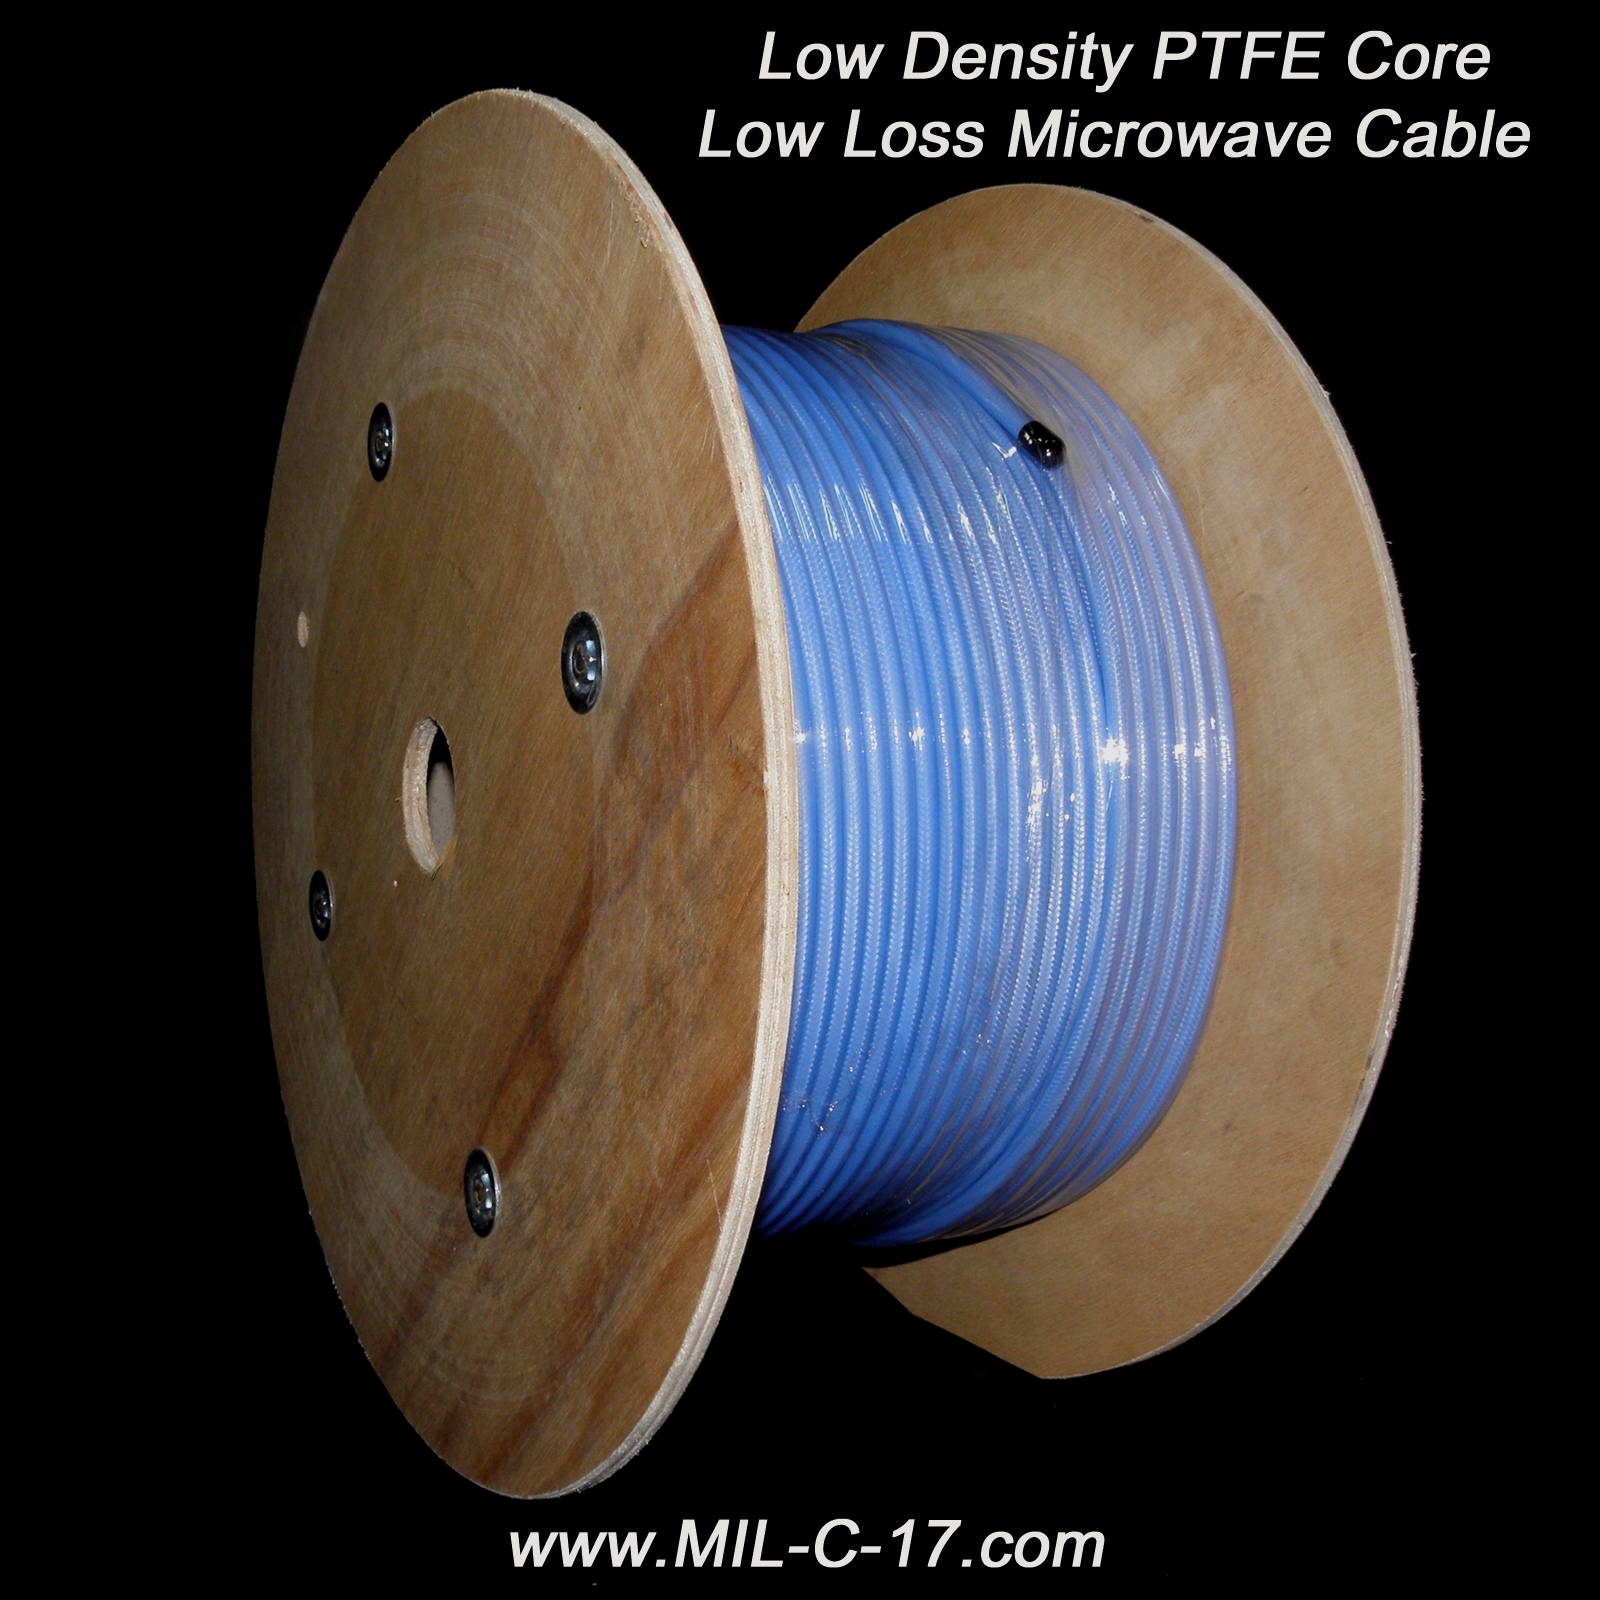 Low Density PTFE Cable, Low Loss PTFE Microwave Cable, Low Loss Low Density PTFE Cable, Low Density PTFE Microwave Coaxial Cable,  Micro-Coax Cable, Utiflex Cable, UFB311A, UFA210B, UFB293C, UFA210A